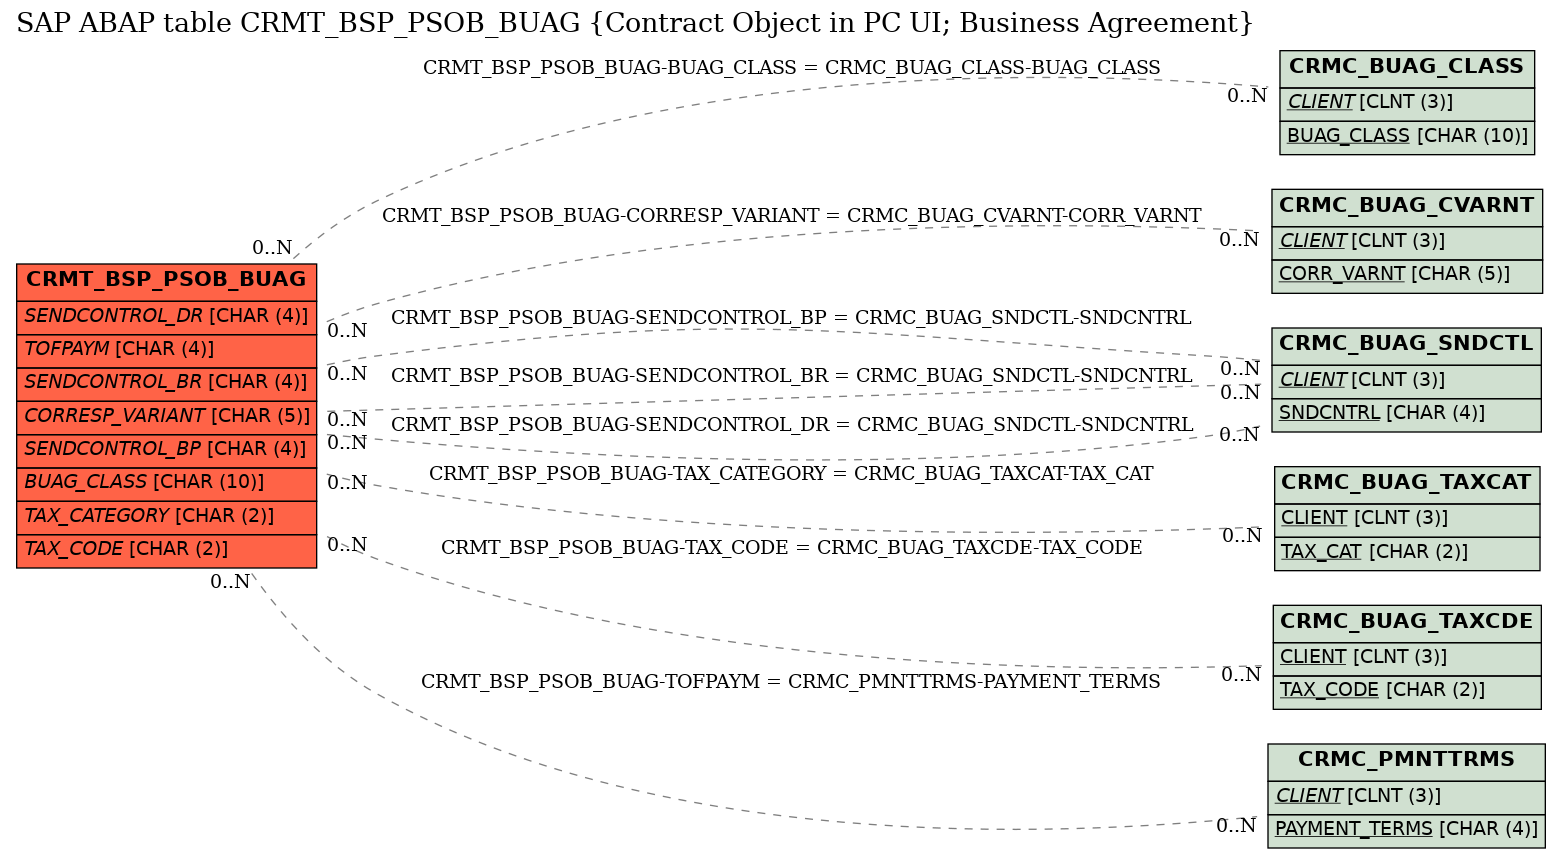 E-R Diagram for table CRMT_BSP_PSOB_BUAG (Contract Object in PC UI; Business Agreement)